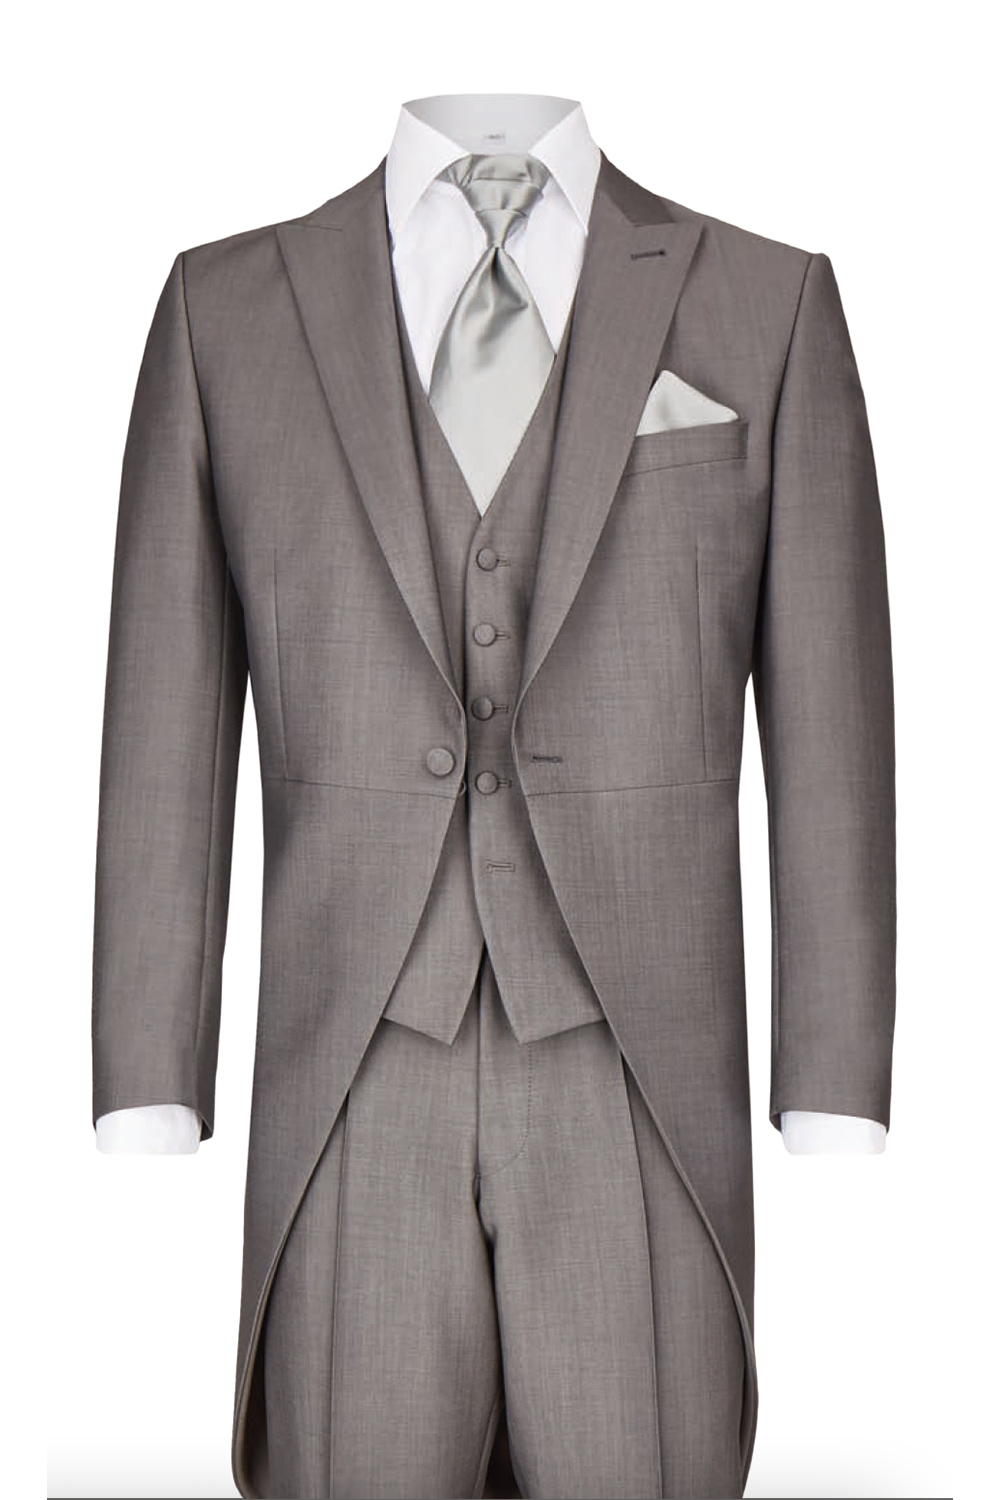 Taupe Morning Coat 3 Piece Suit